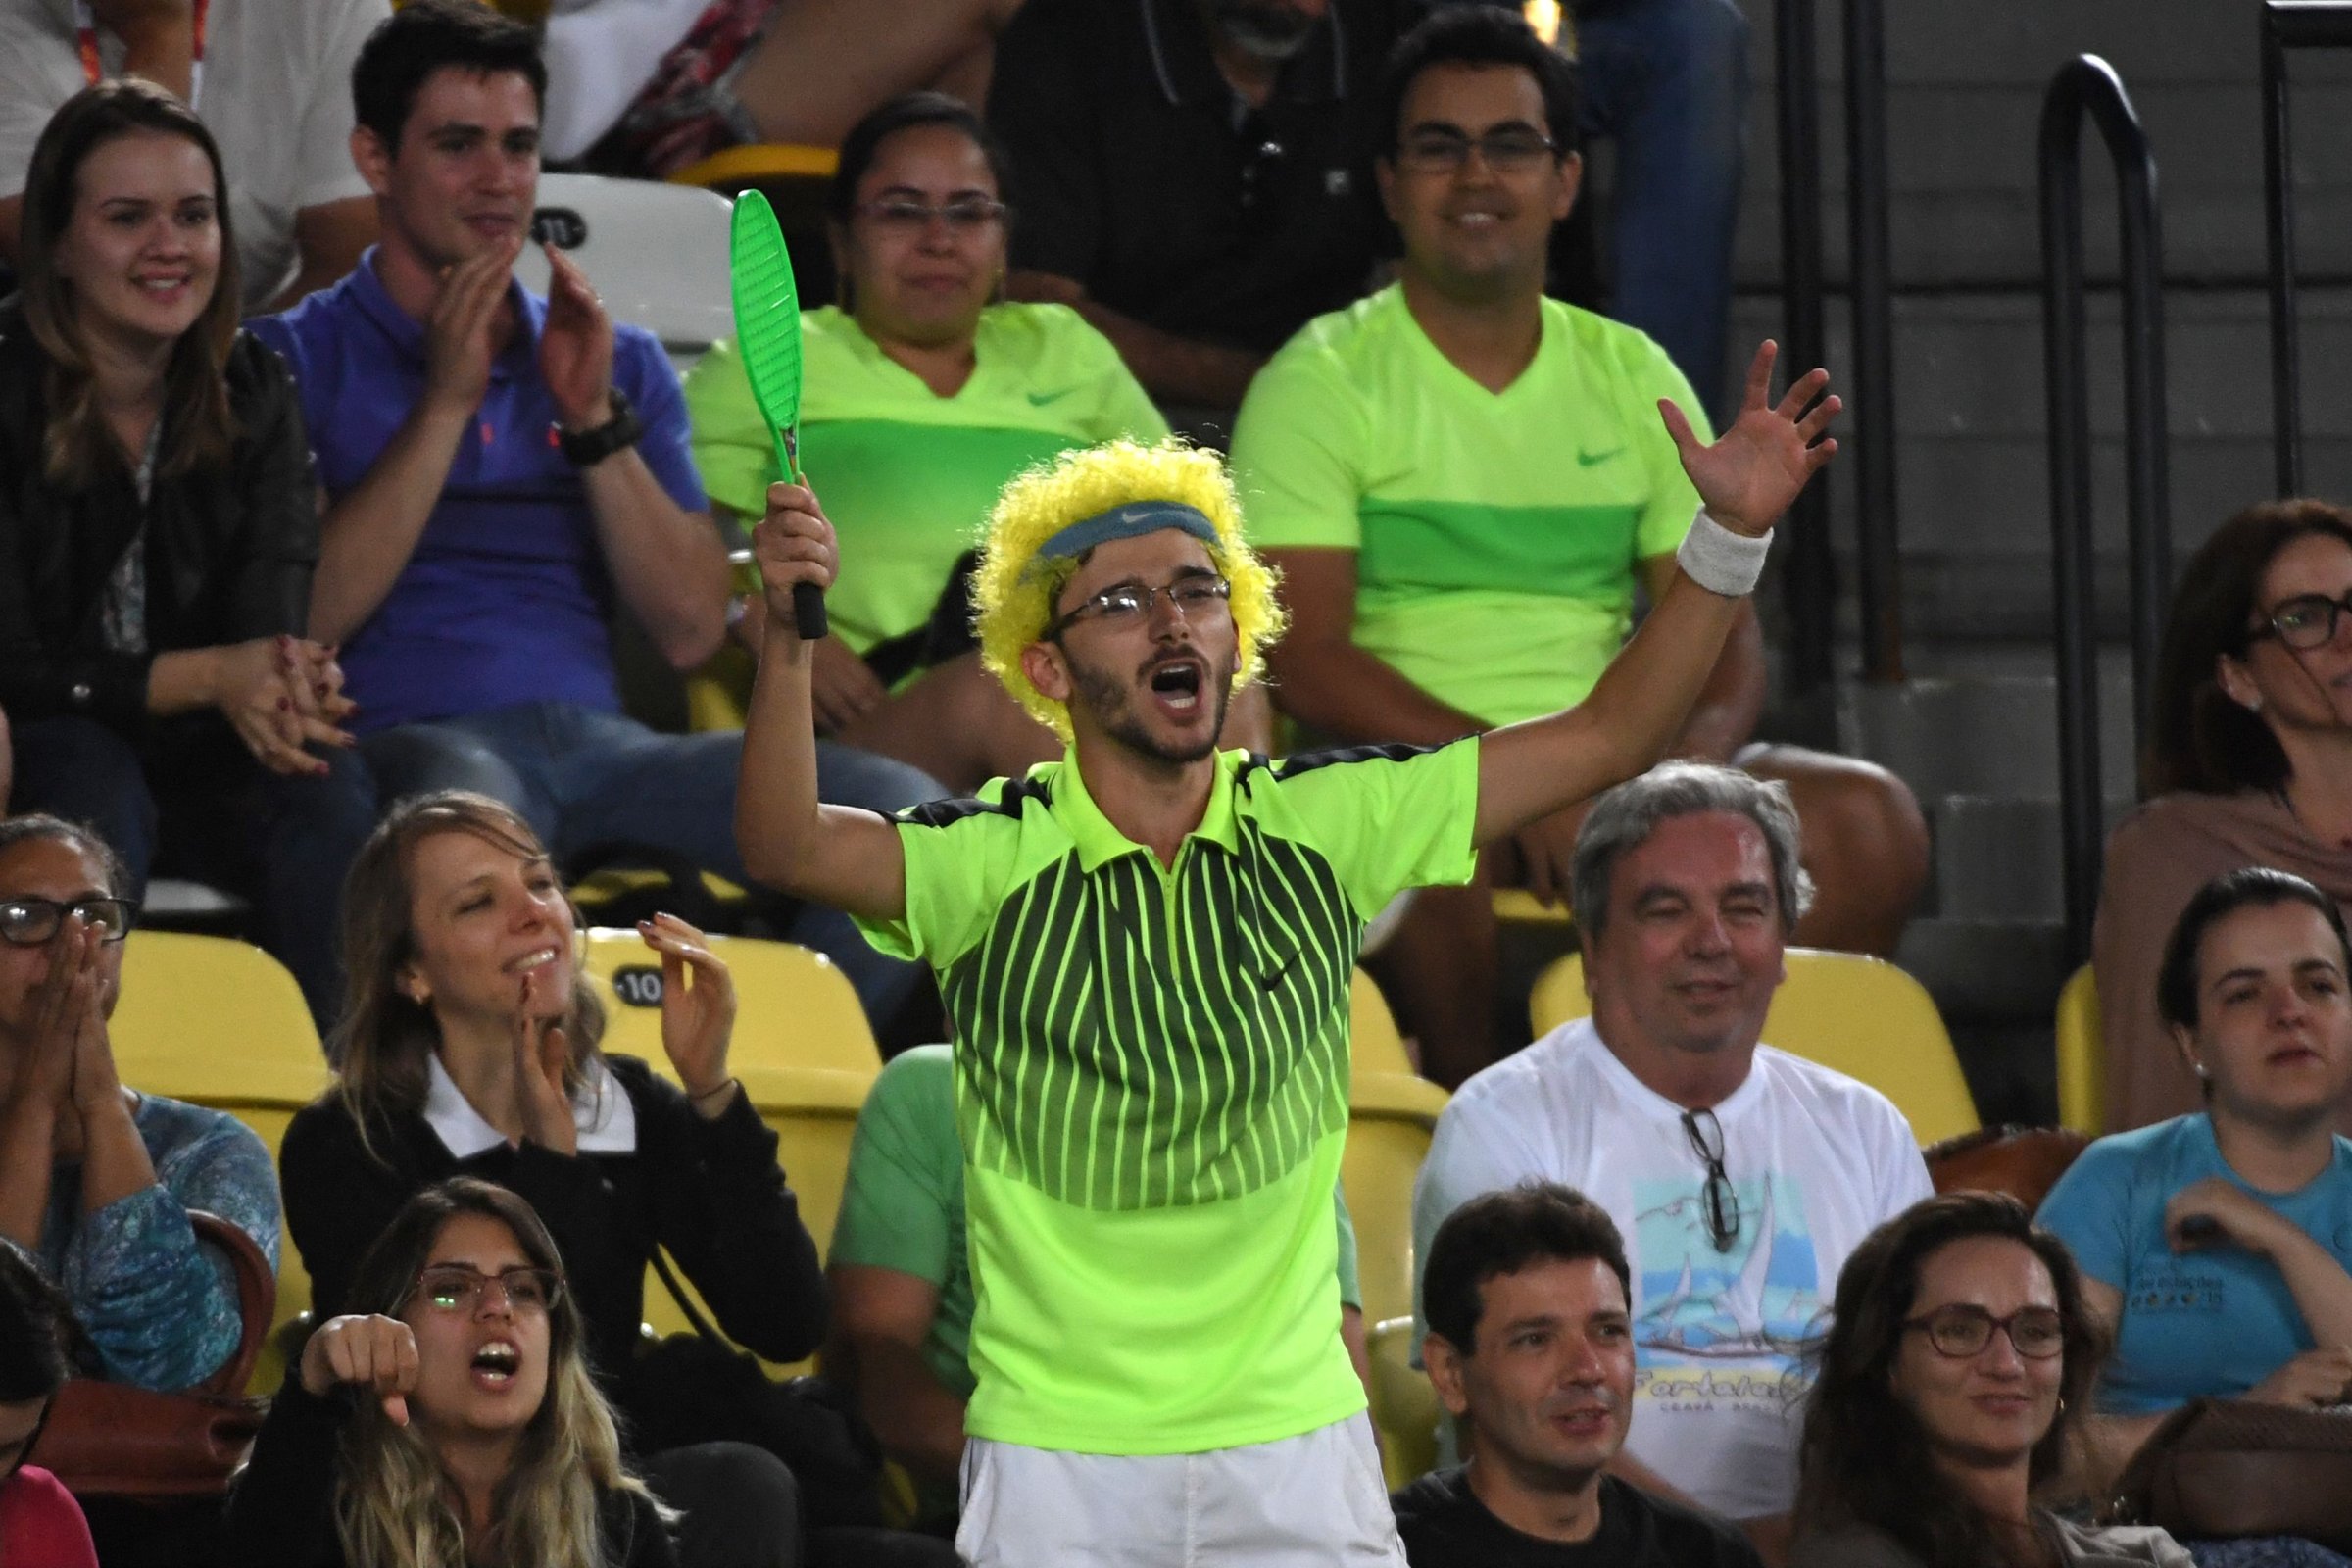 A fan wearing a green wig cheers during the men's second round singles tennis match between Japan's Kei Nishikori and Australia's John Millman at the Olympic Tennis Centre of the Rio 2016 Olympic Games in Rio de Janeiro on August 8, 2016.